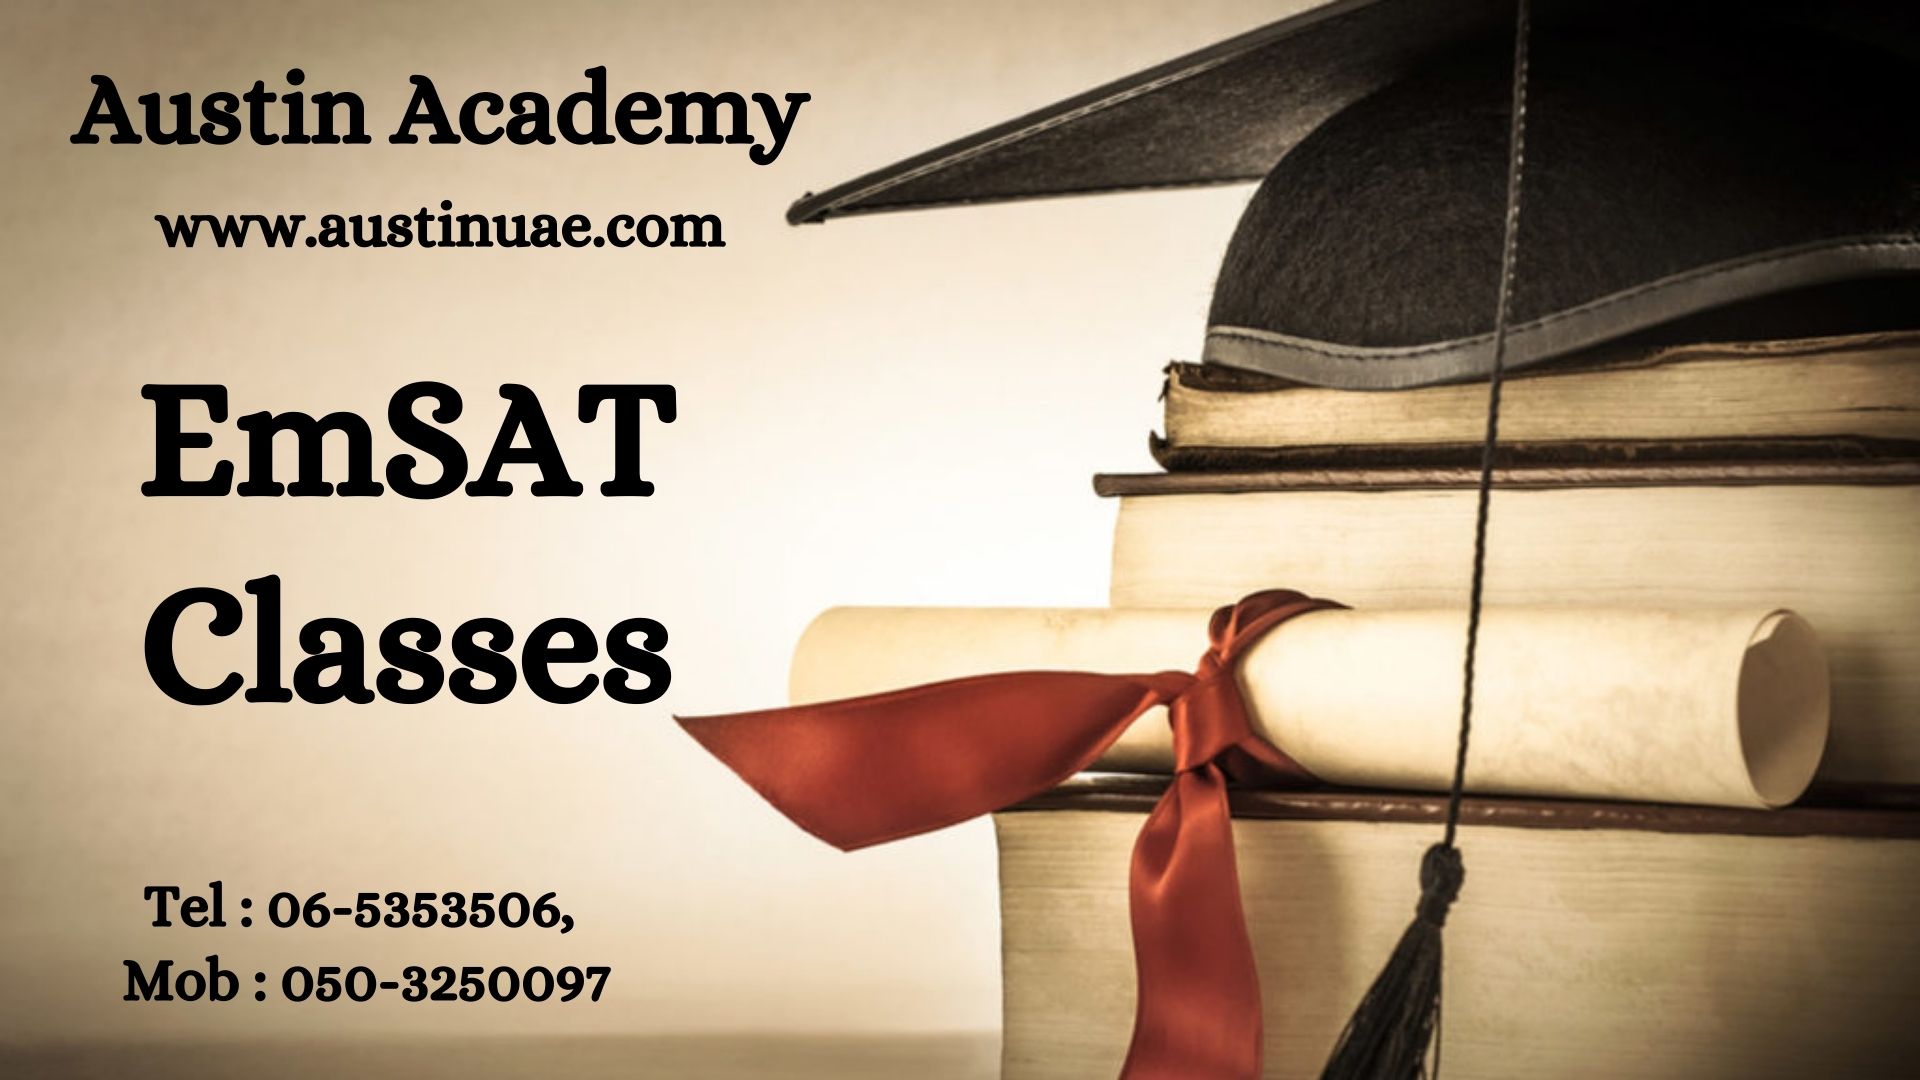 Emsat Training In Sharjah With Great Offer 0588197415